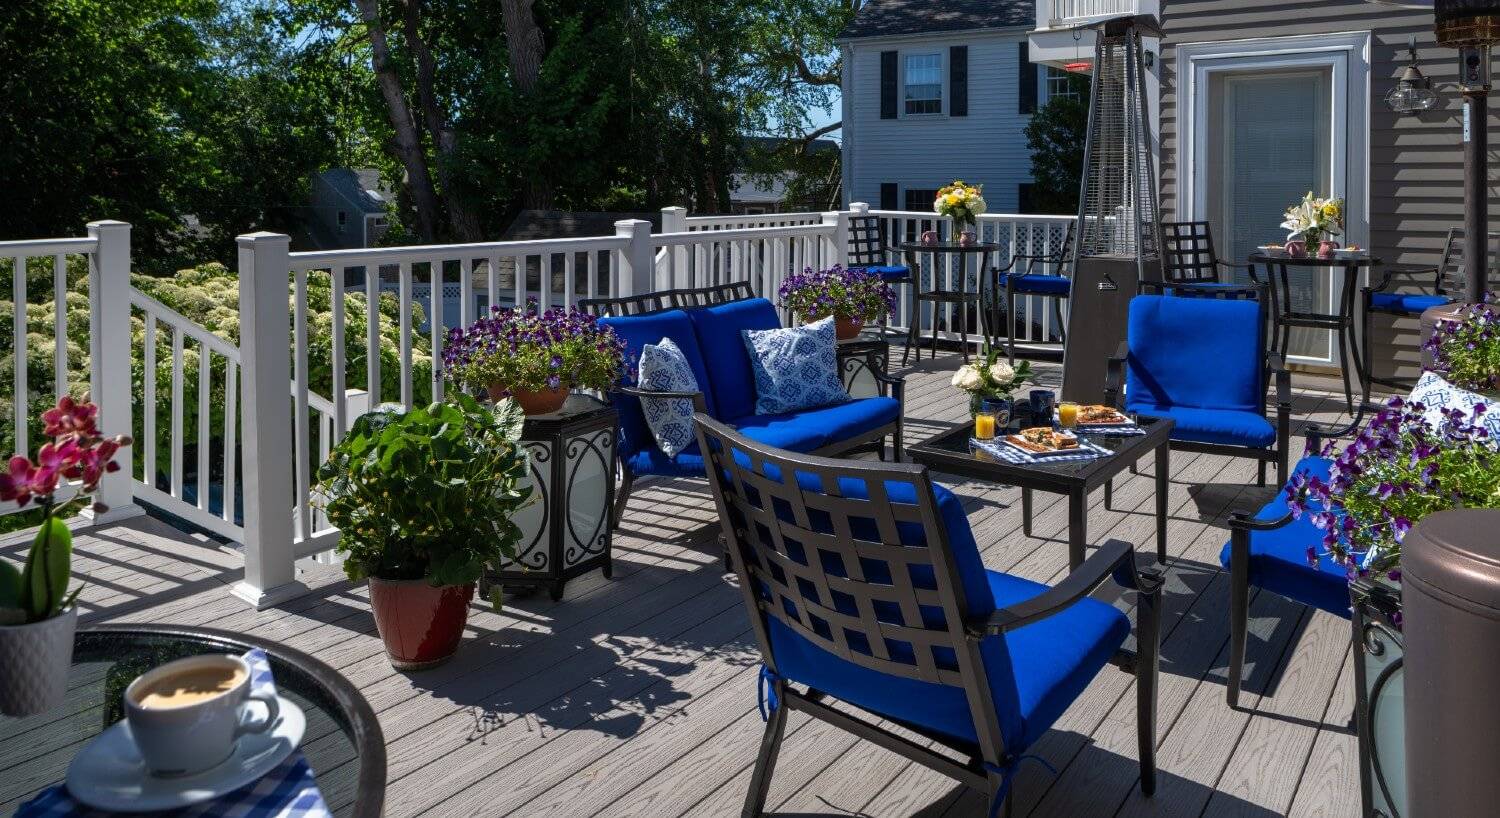 A large outdoor deck with patio furniture with blue cushions and lots of fresh pots of flowers